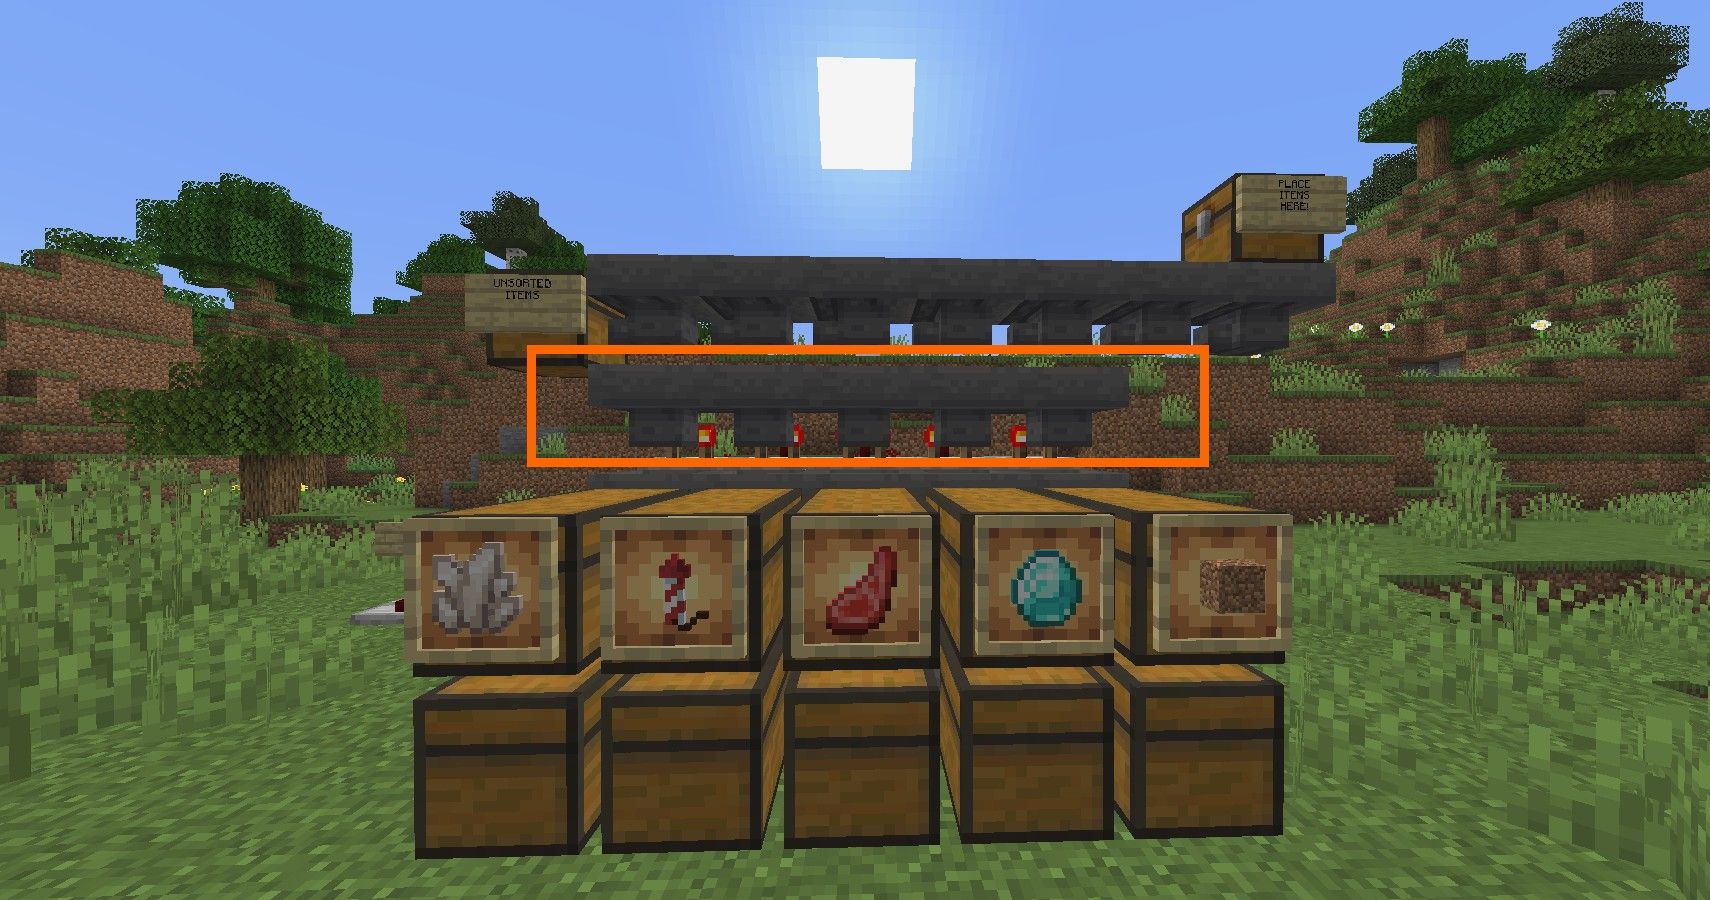 minecraft auto sorter hoppers highlighted to create filter